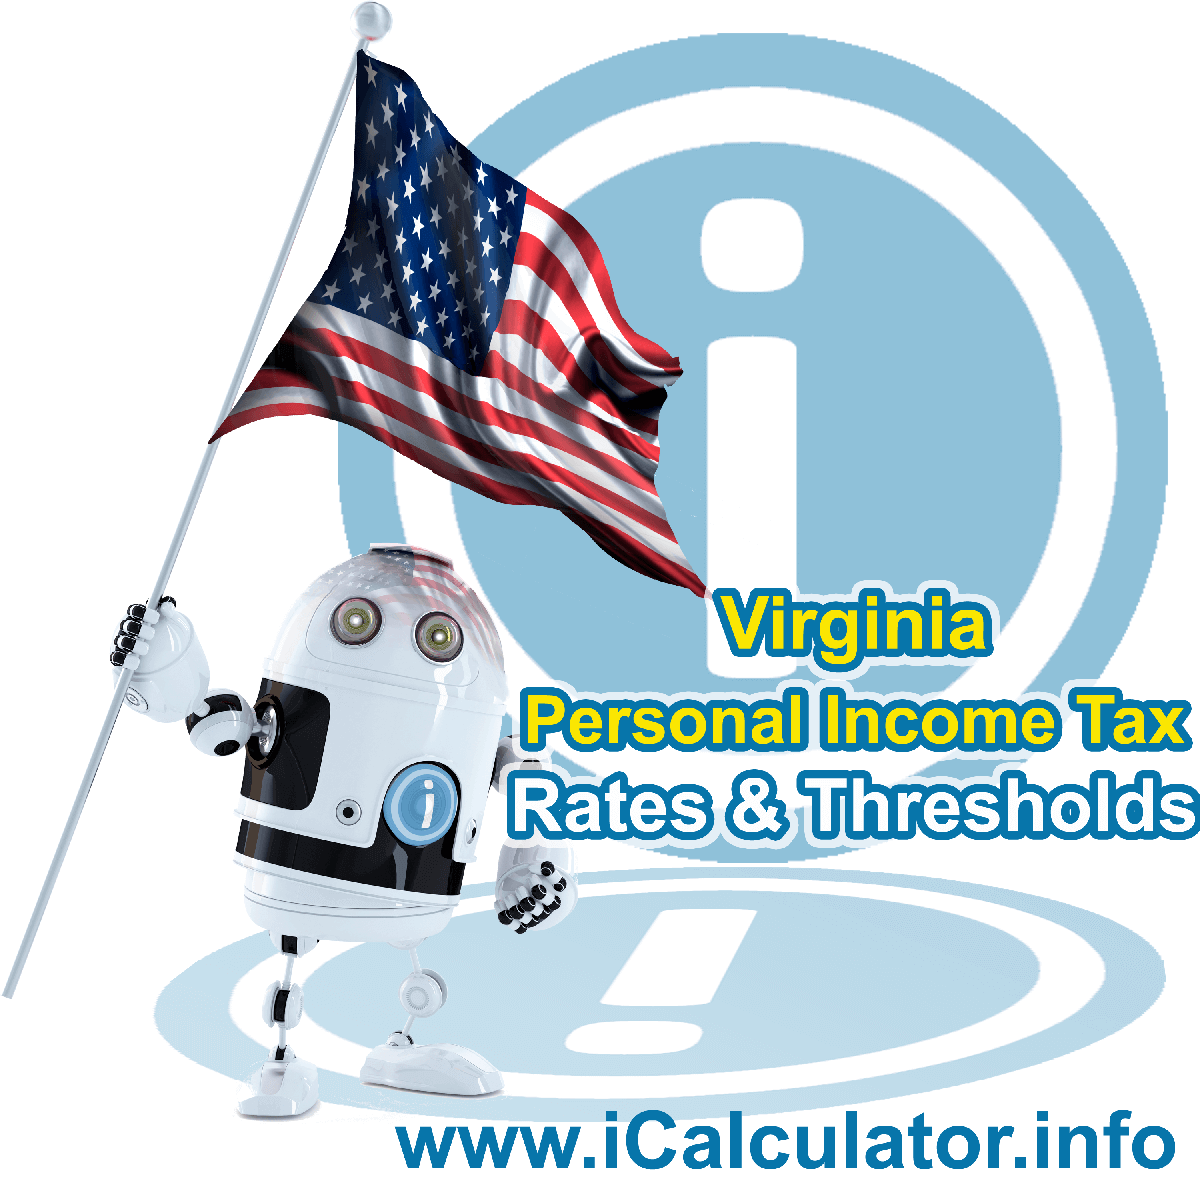 Virginia State Tax Tables 2016. This image displays details of the Virginia State Tax Tables for the 2016 tax return year which is provided in support of the 2016 US Tax Calculator